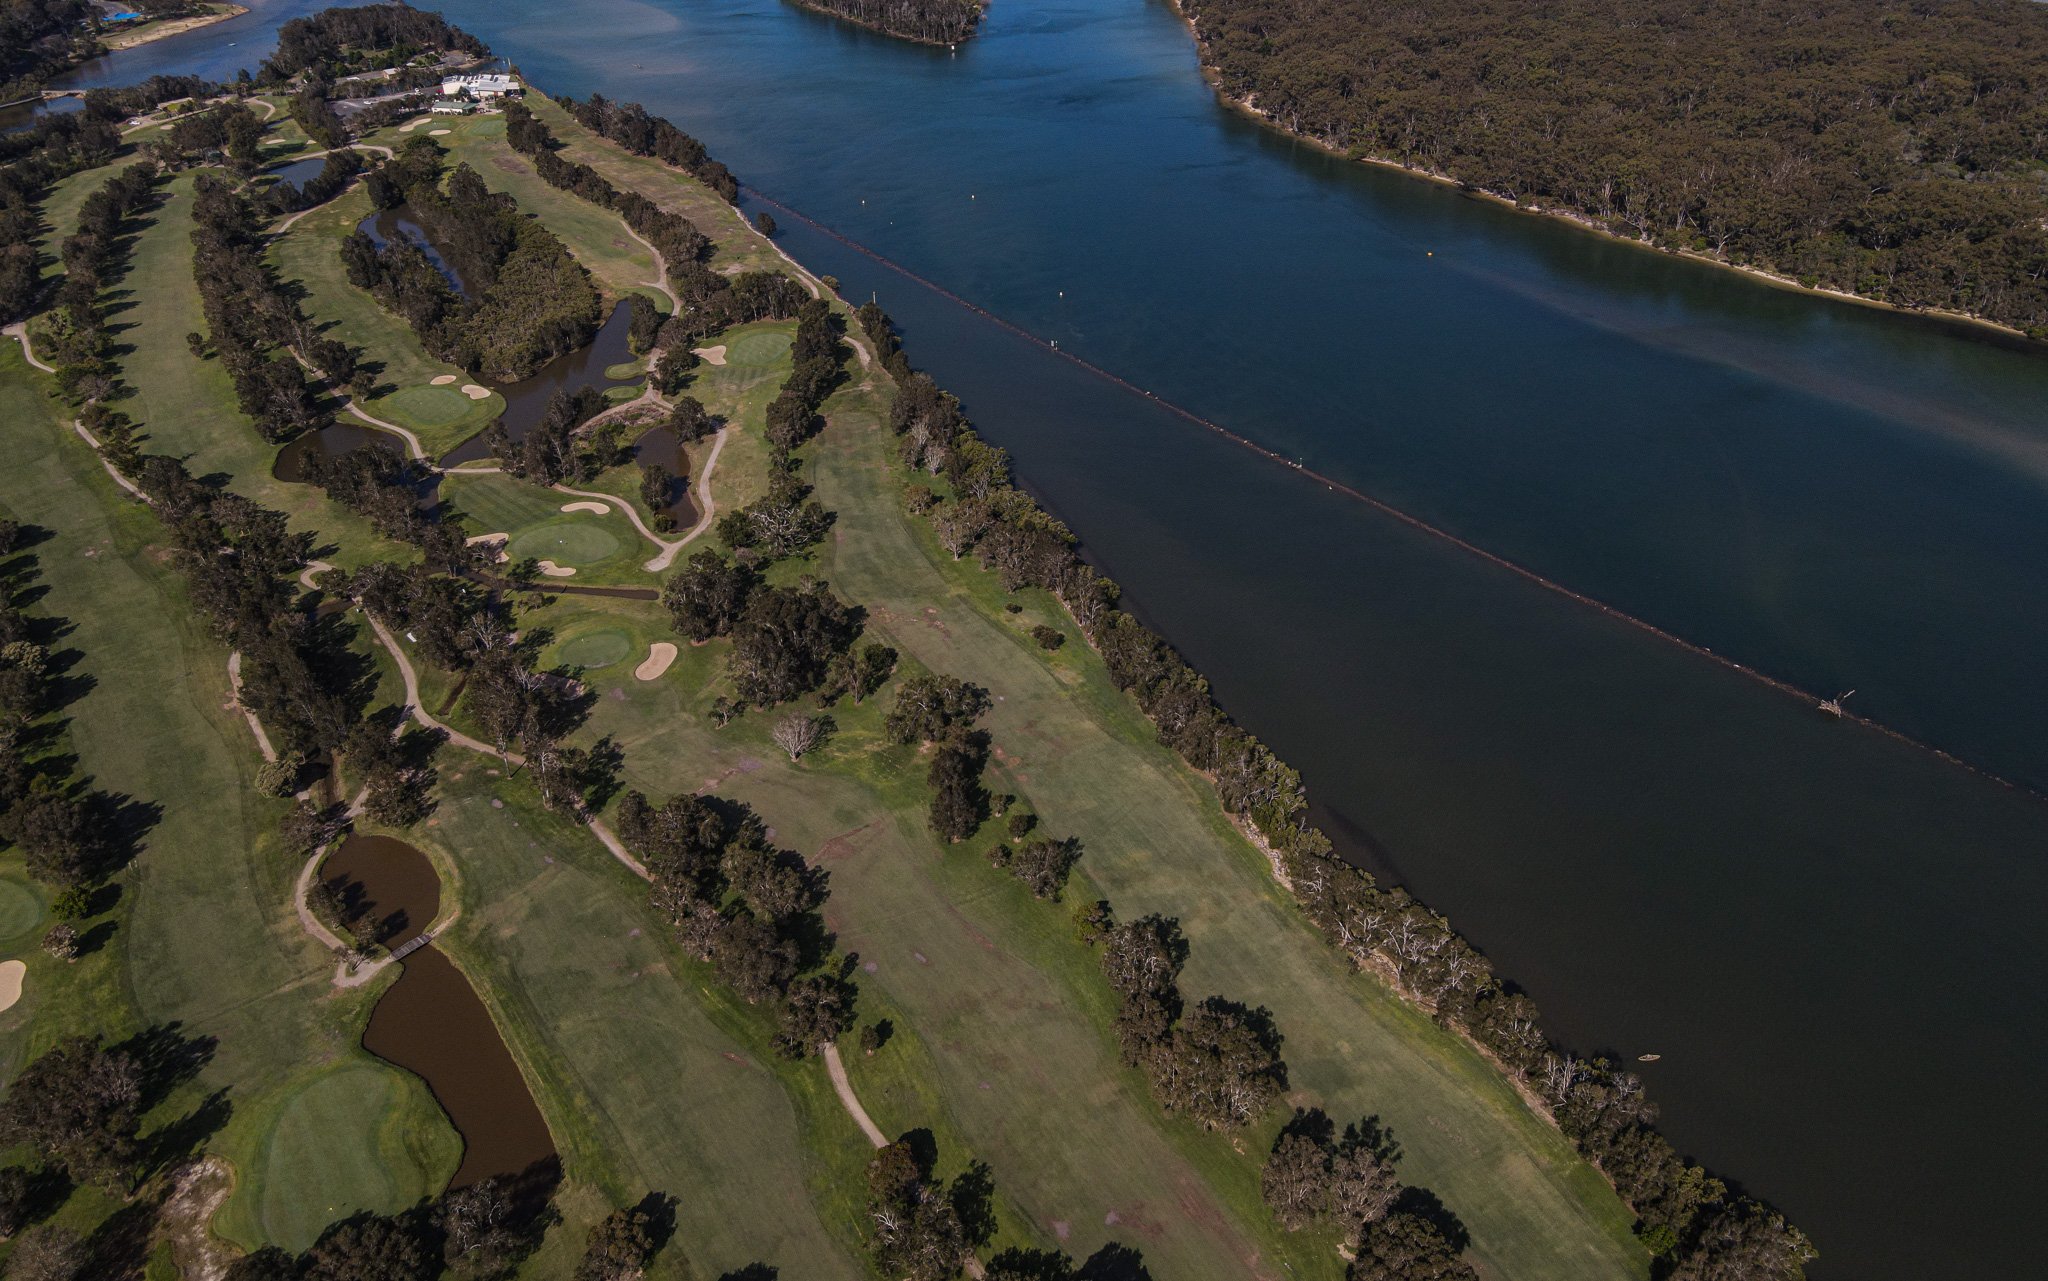  An Estuarine Wetland turned into a golf course at Nambucca Heads, Australia which is also sacred to the Gumbaynggirr people of the land. 